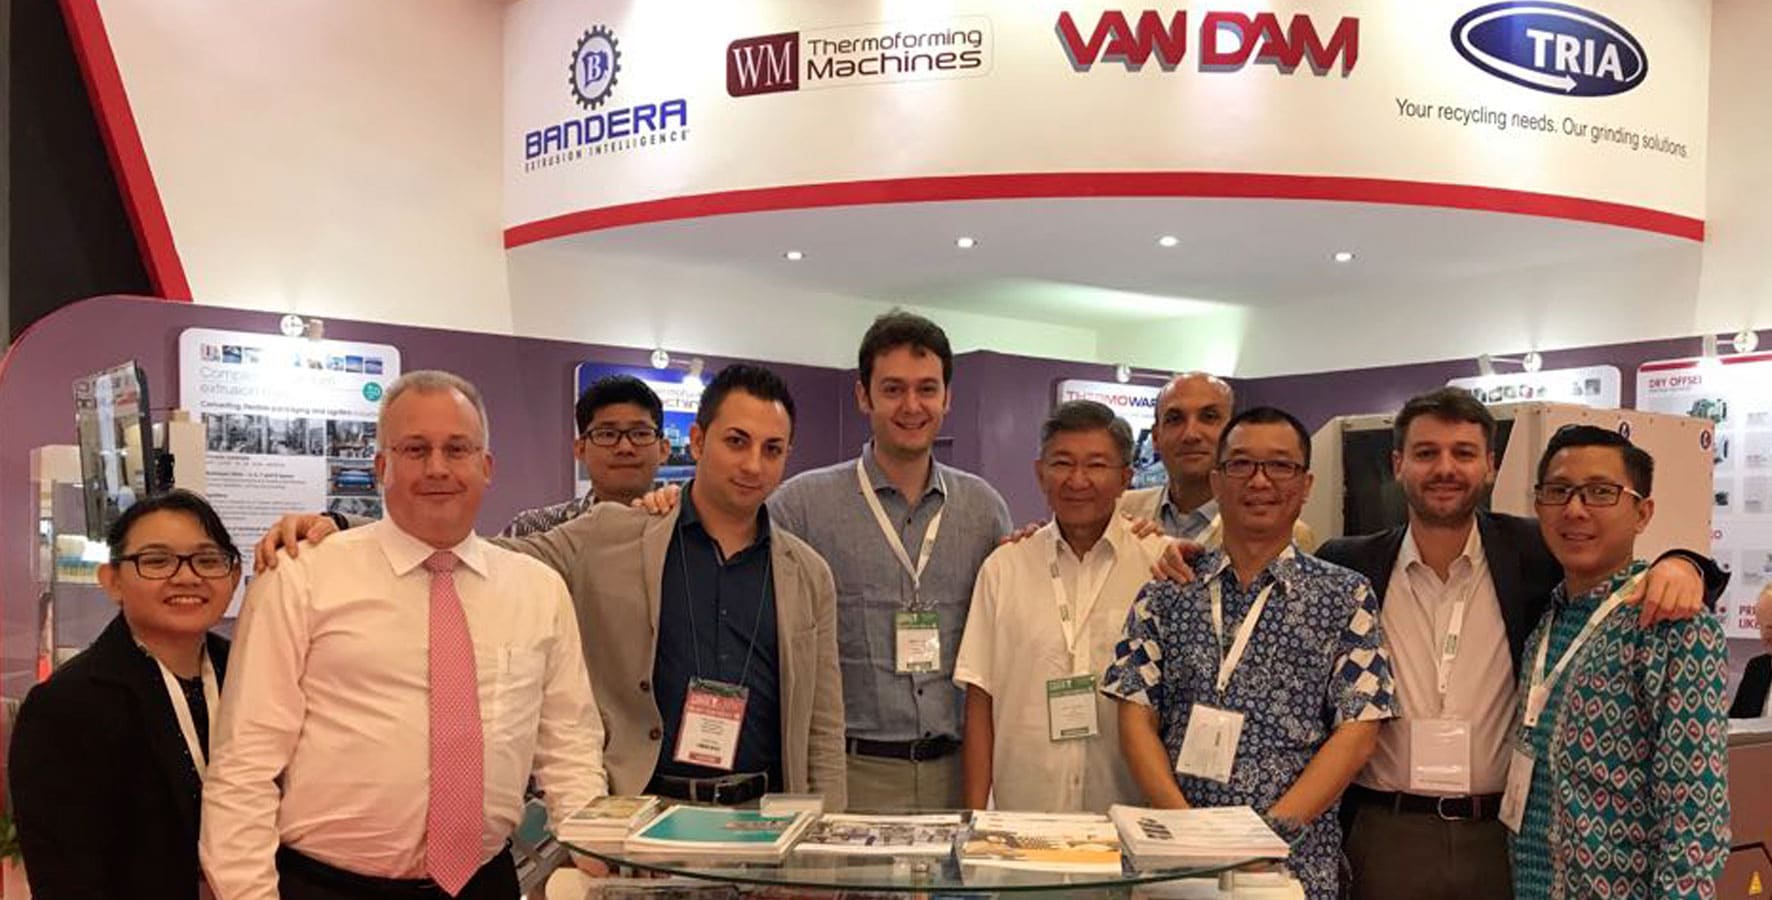 Thank you for visiting WM at Plastics&Rubber INDONESIA